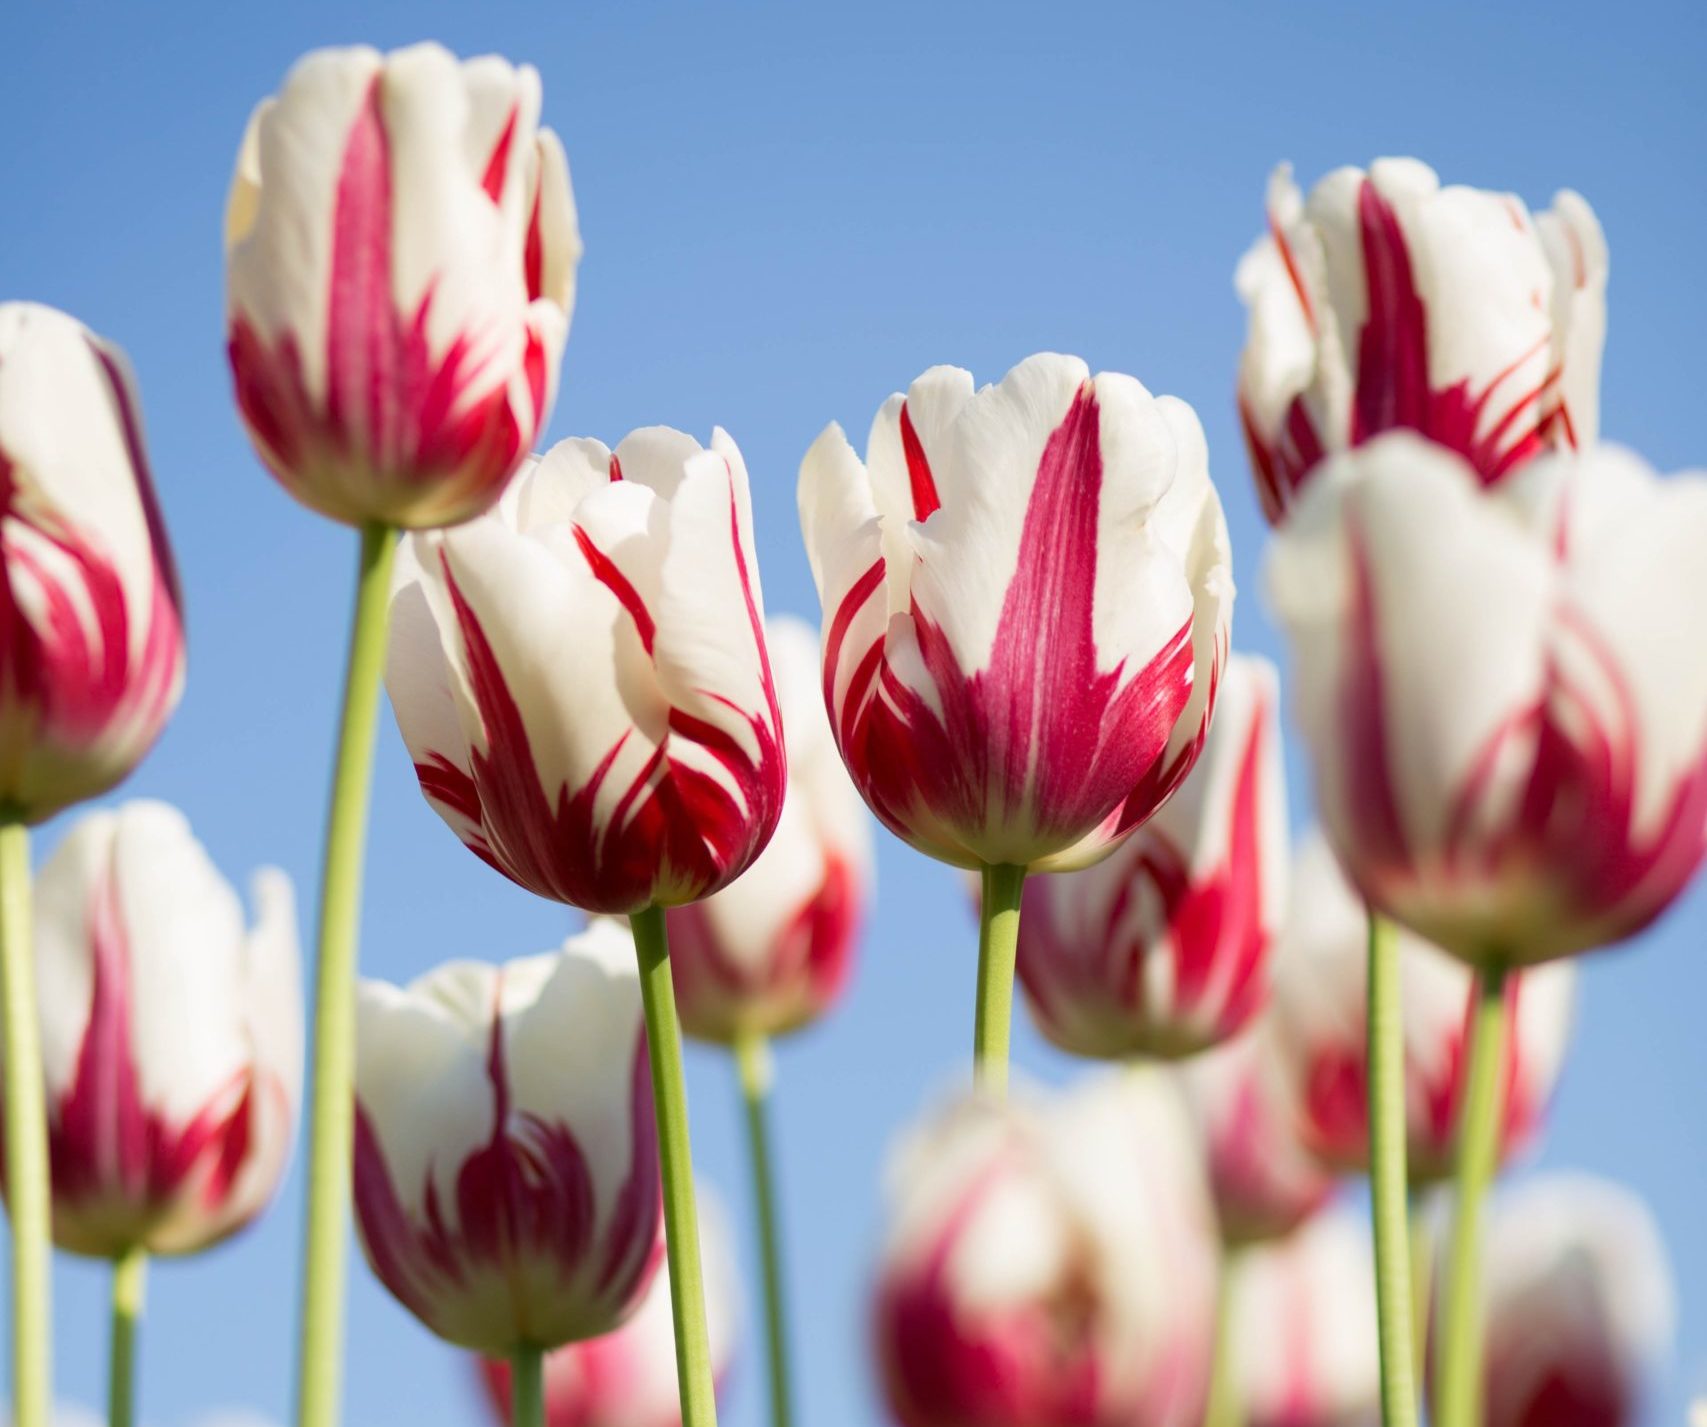 Image: Pink and white tulips against a blue sky